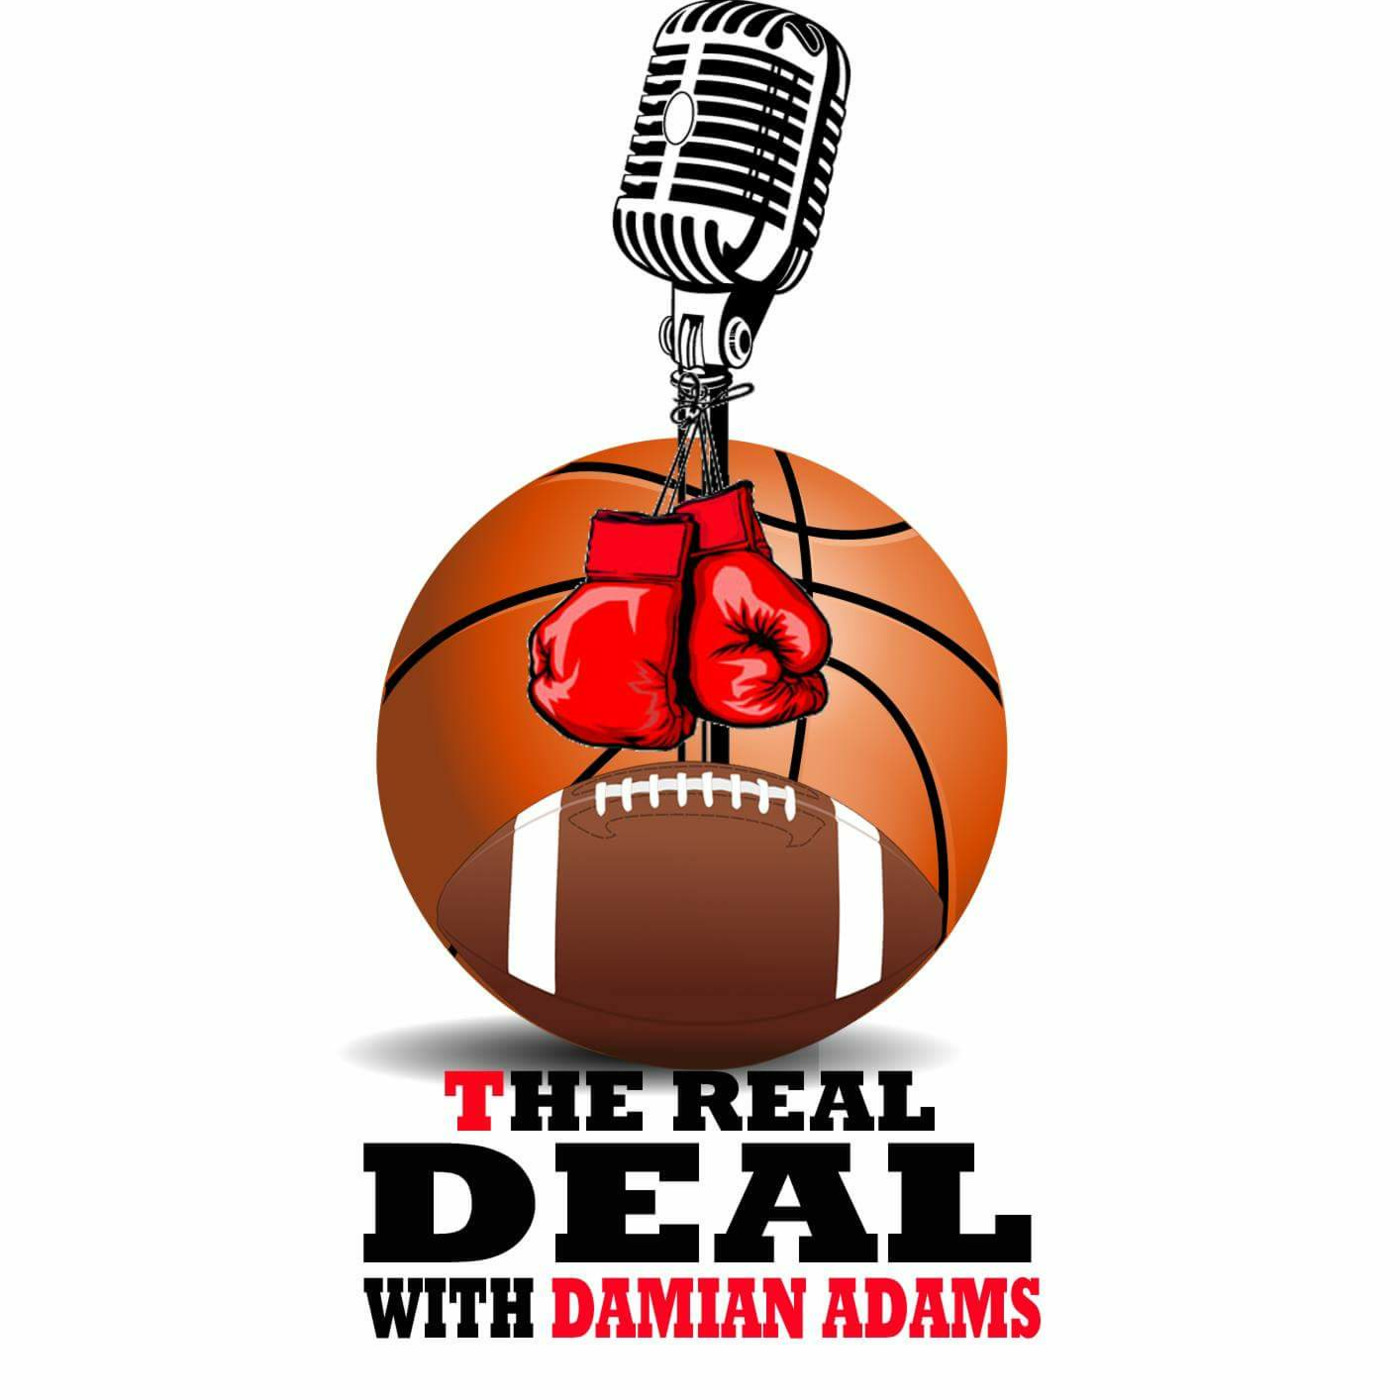 The Real Deal with Damian Adams